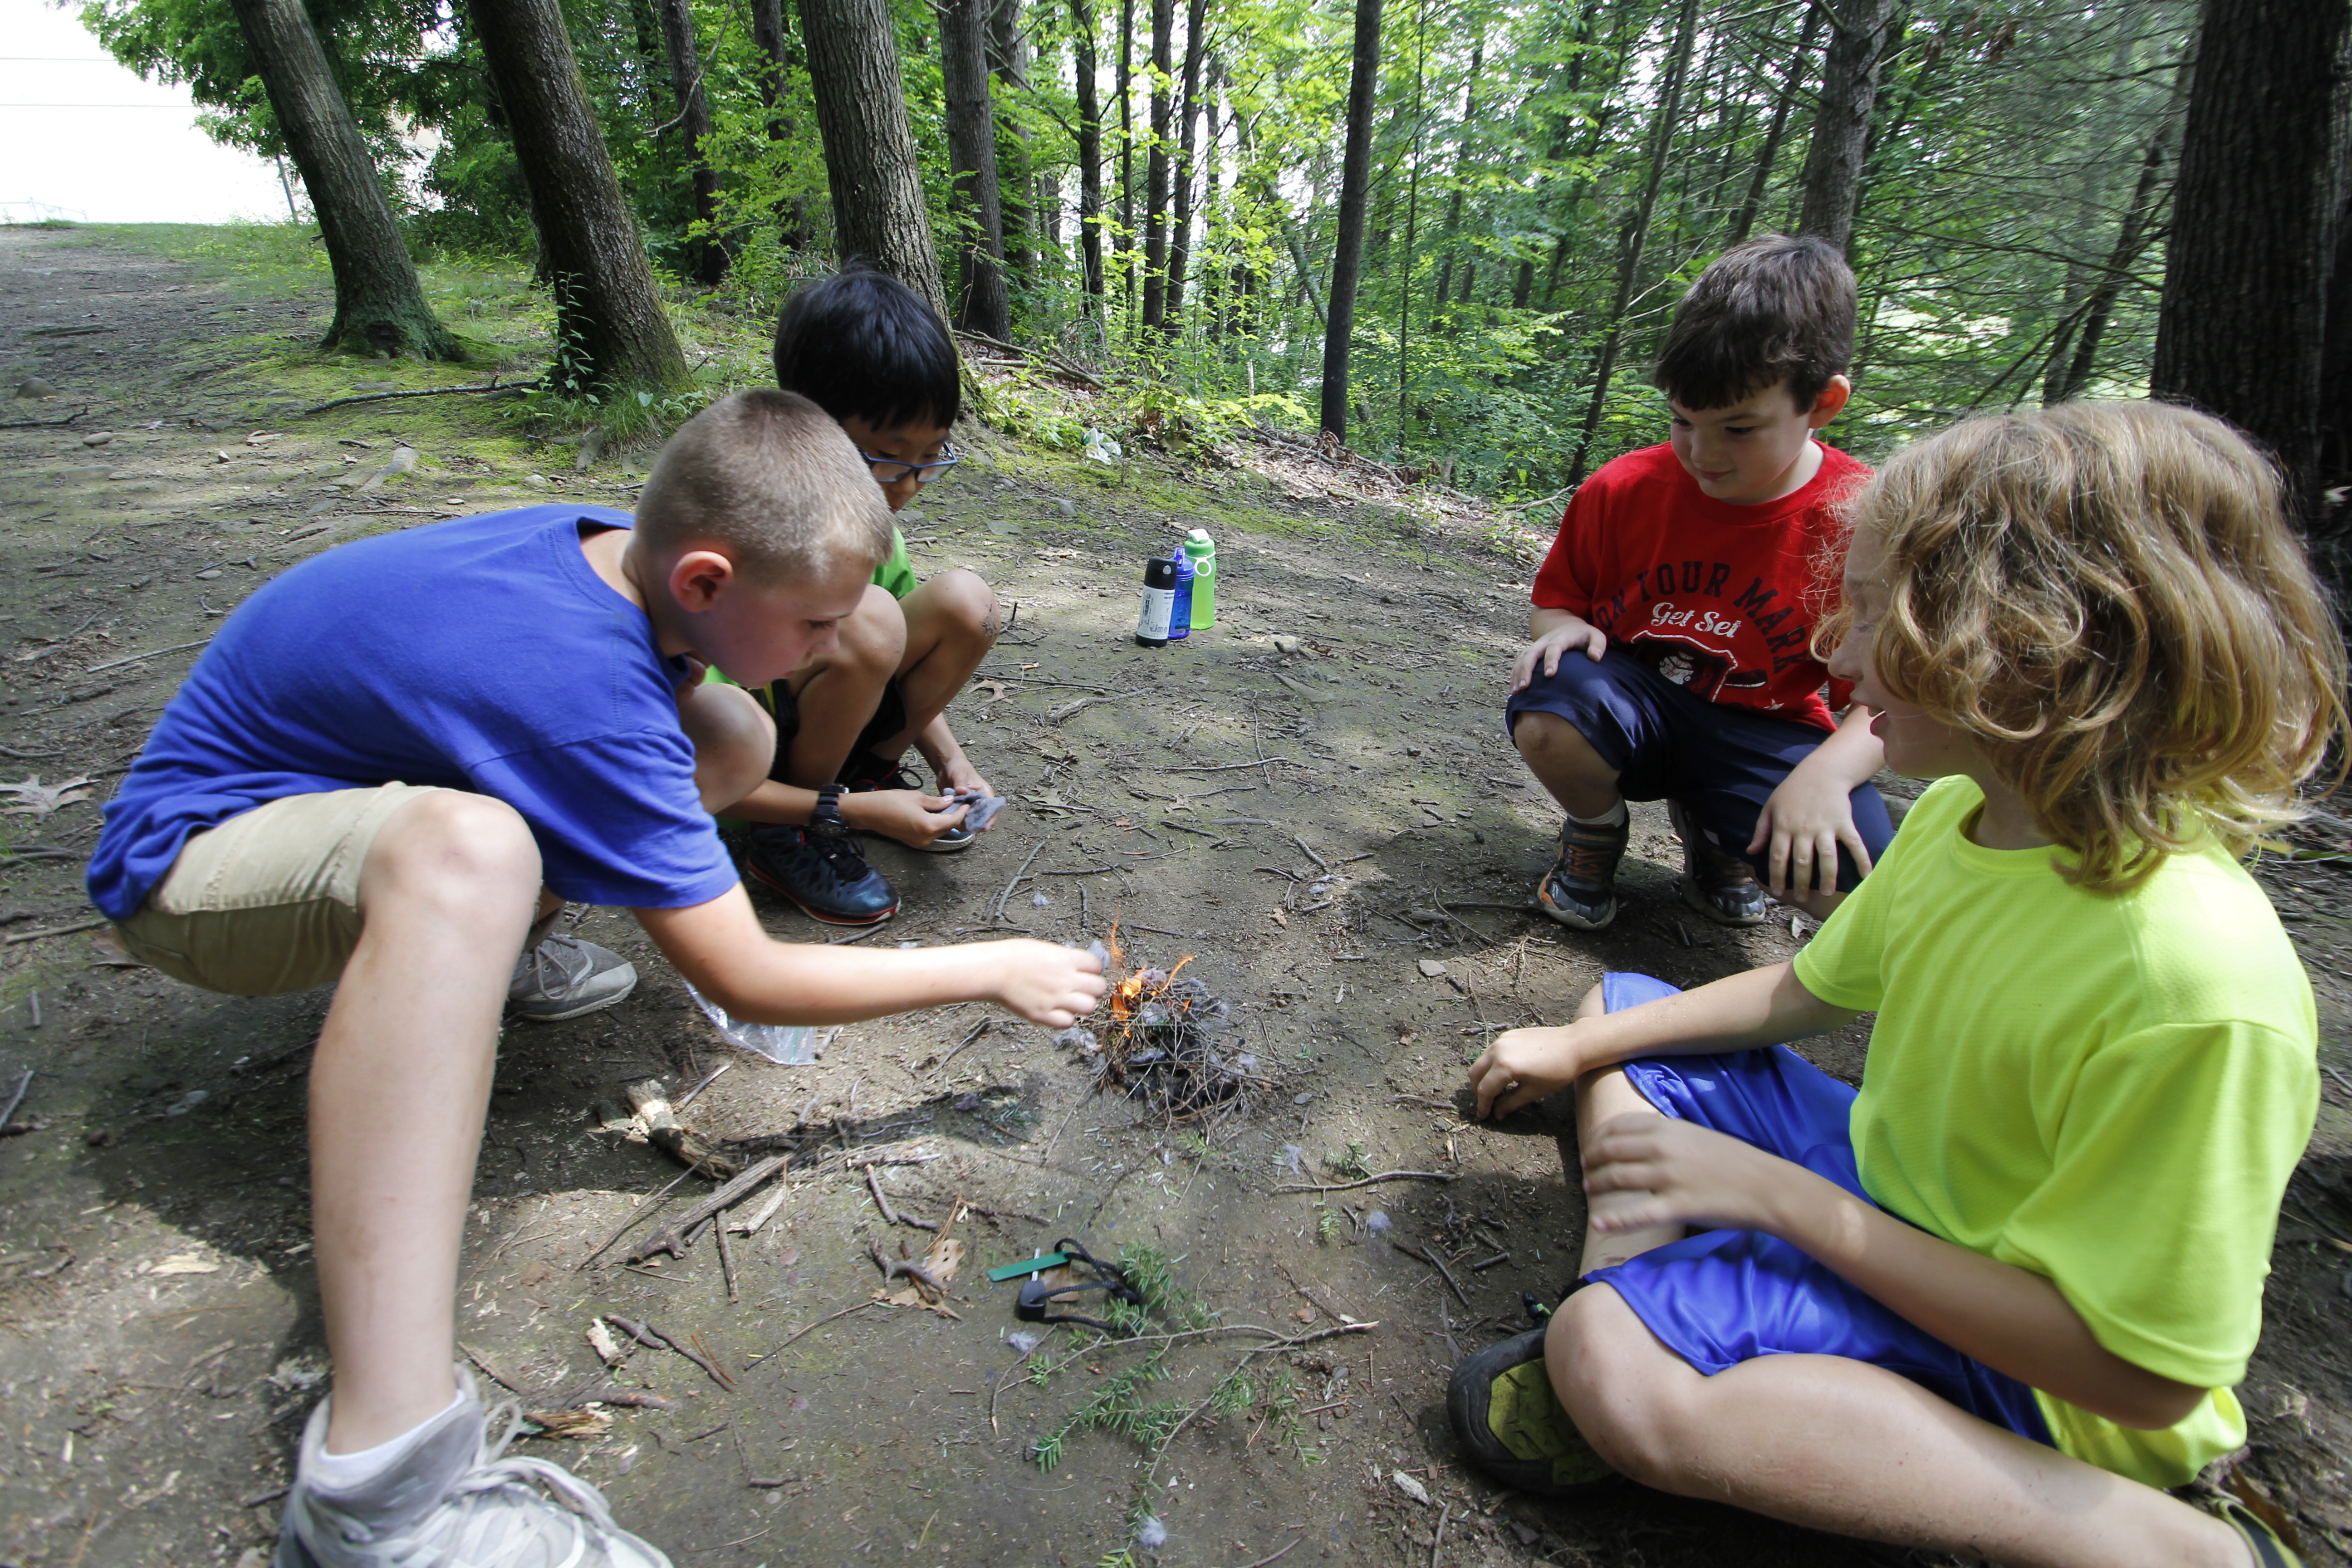 Four children start a campfire in the woods